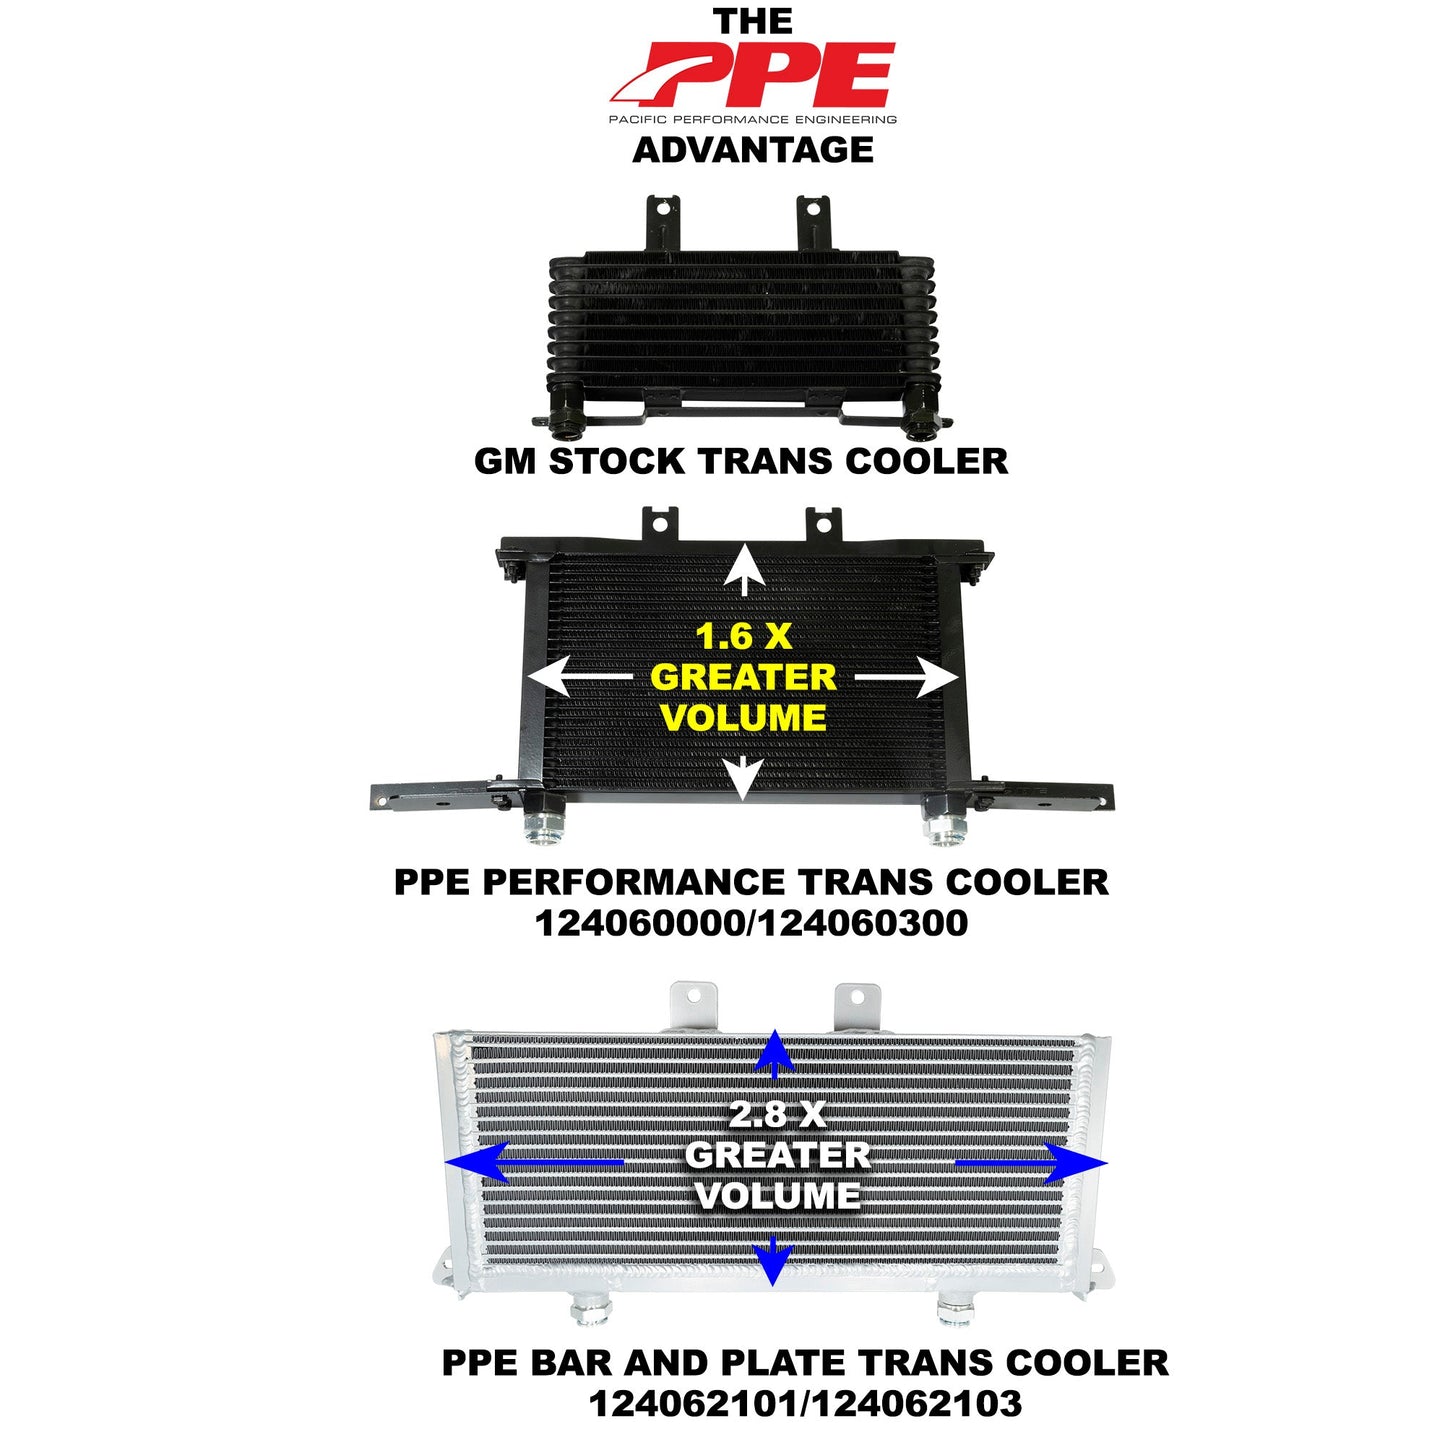 2001-2003 / 2003-2005 GM 6.6L Duramax w/ Allison Transmission Bar and Plate Transmission Cooler Pacific Performance Engineering